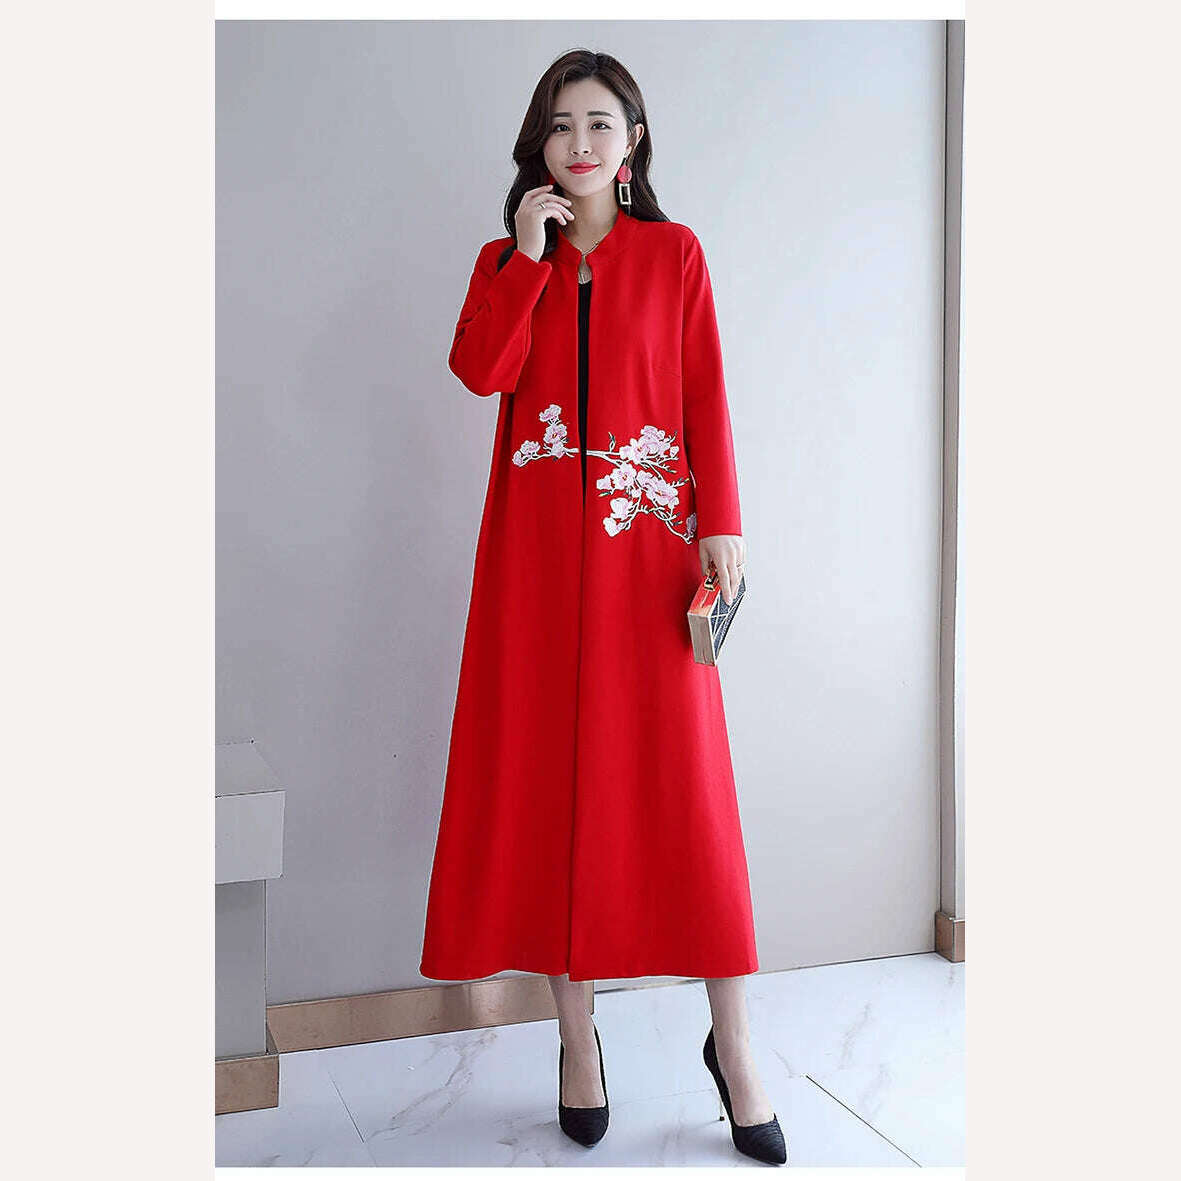 2020 New Chinese Style Women's Black Retro Embroidery Long Cardigan Long Trench Coat Spring Autumn Female Windbreaker тренч, KIMLUD Women's Clothes